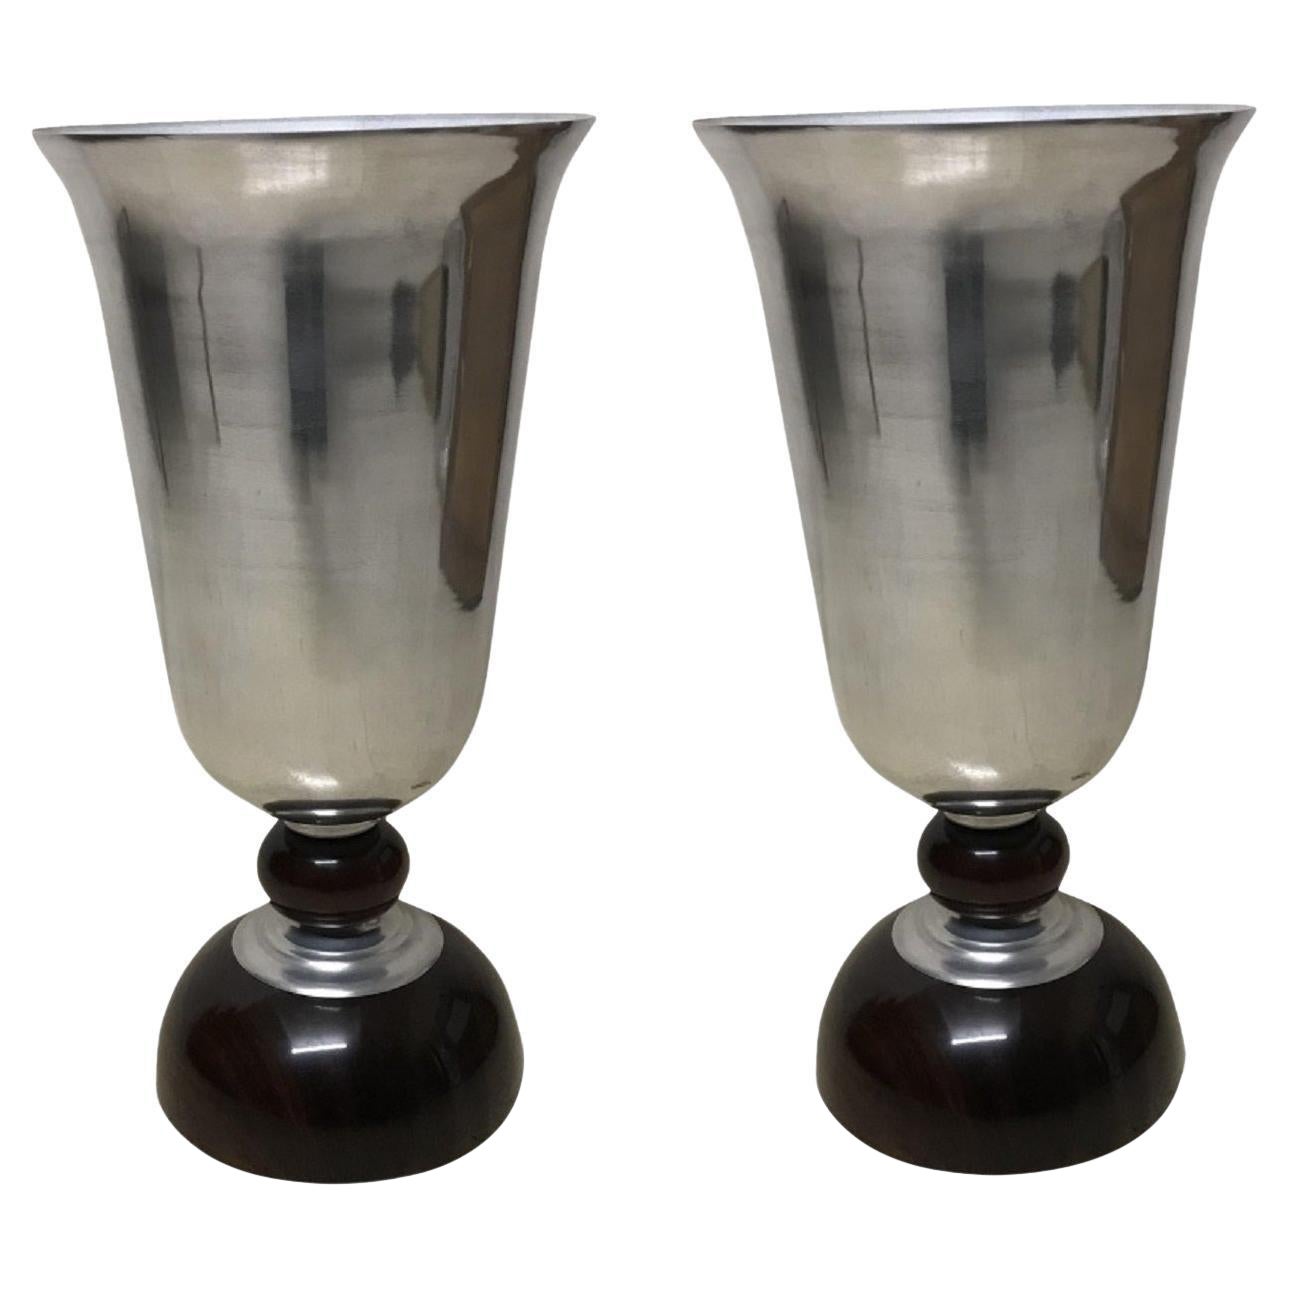 2 Monumental Table Lamps, Style :Art Deco, 1930, Country: German